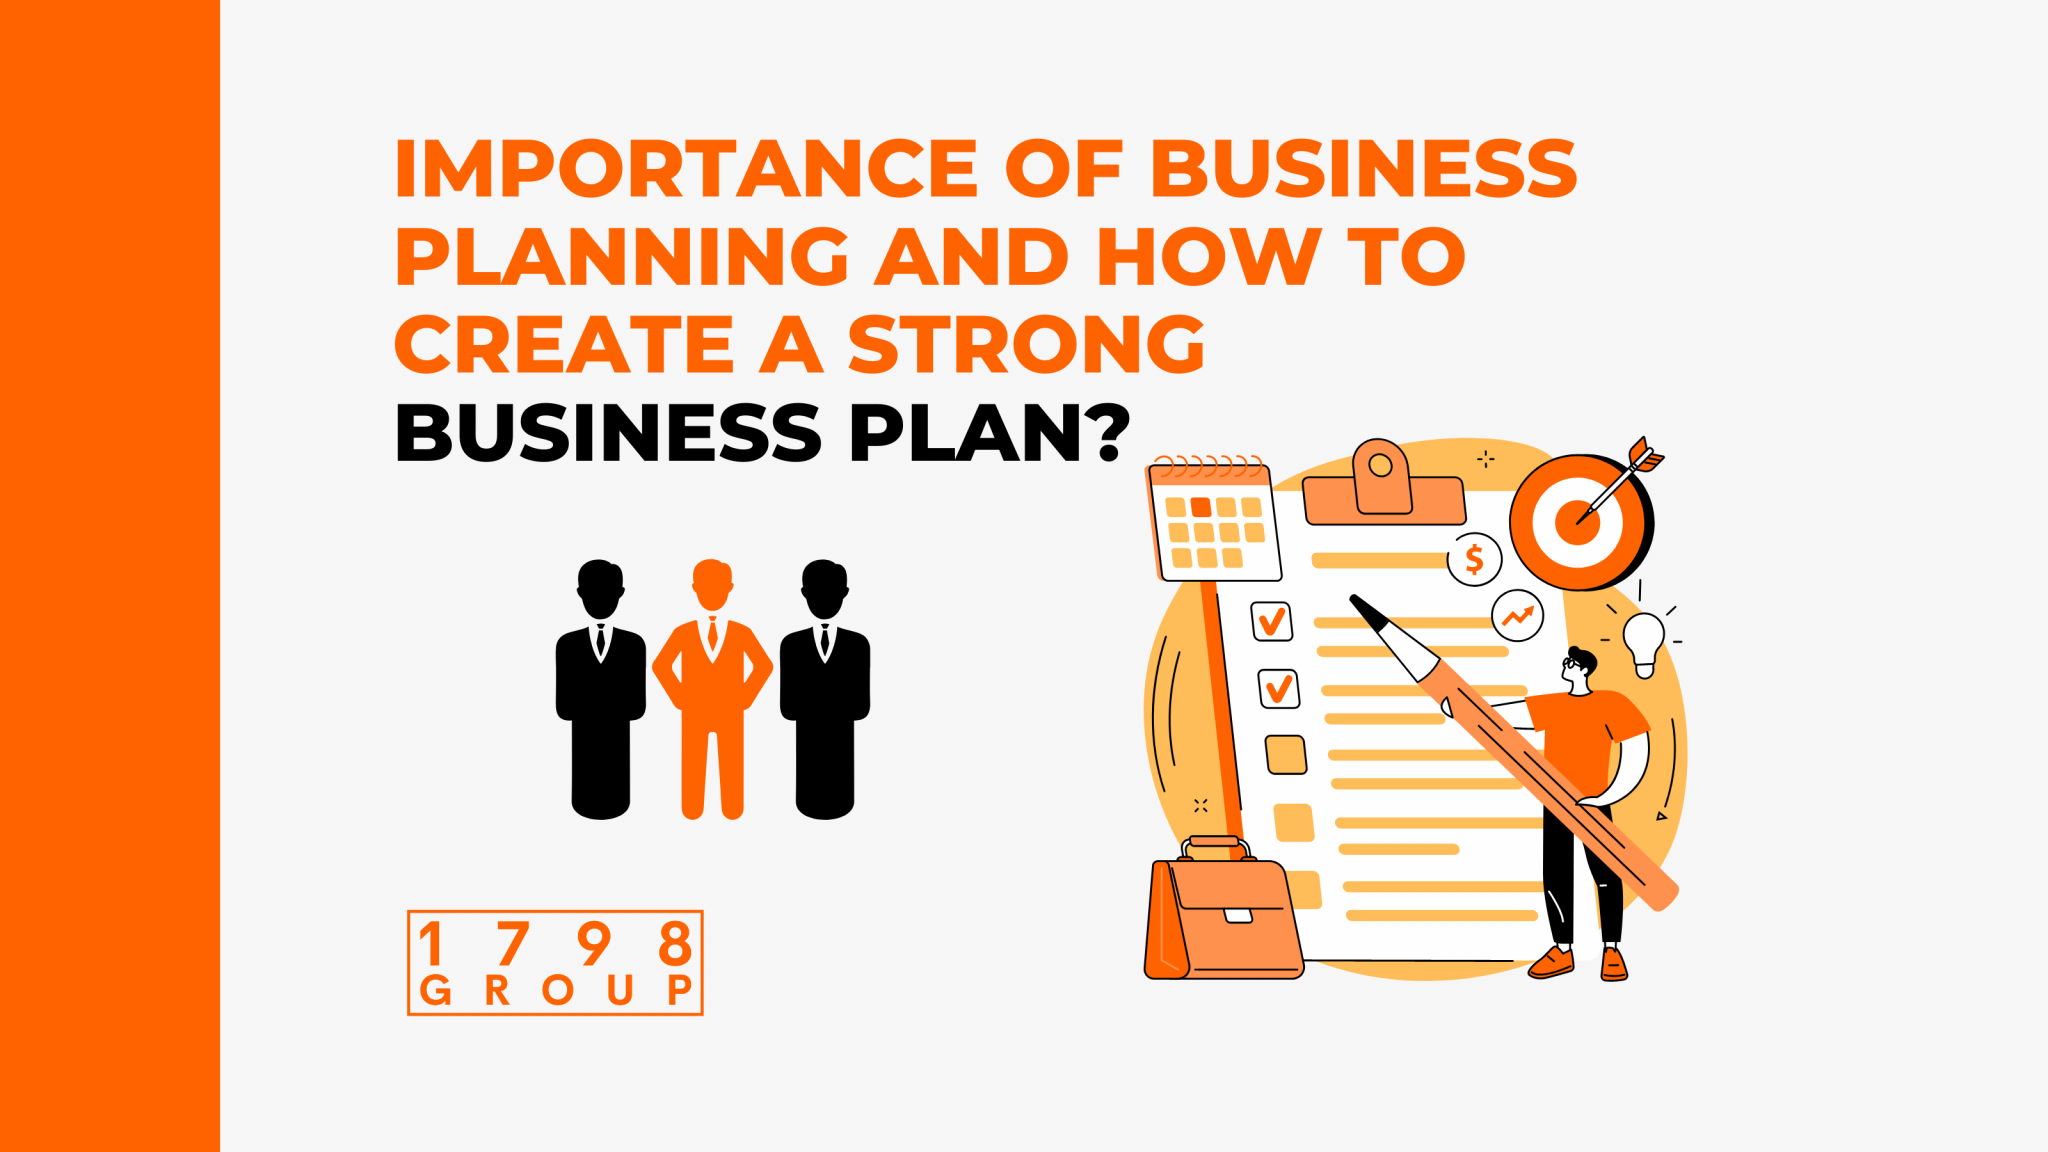 the main importance of business planning is